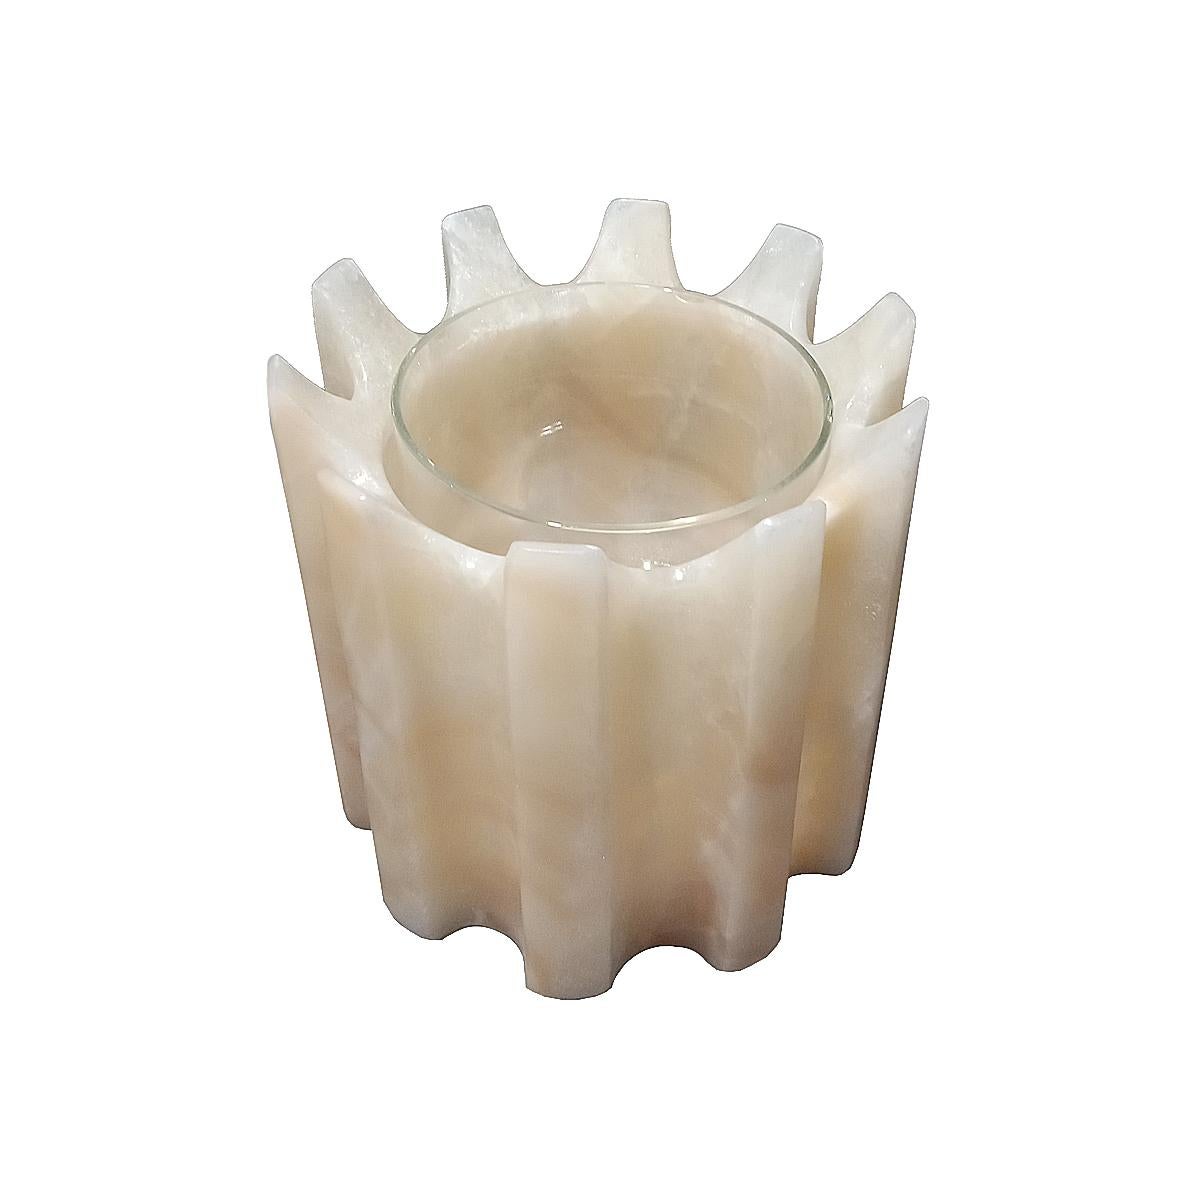 A stunning cylindrical vase with carved ridges, in cream color Onyx. It contains a thin glass vase in order to hold water or soil. Works as a planter or as a flower vase. 
